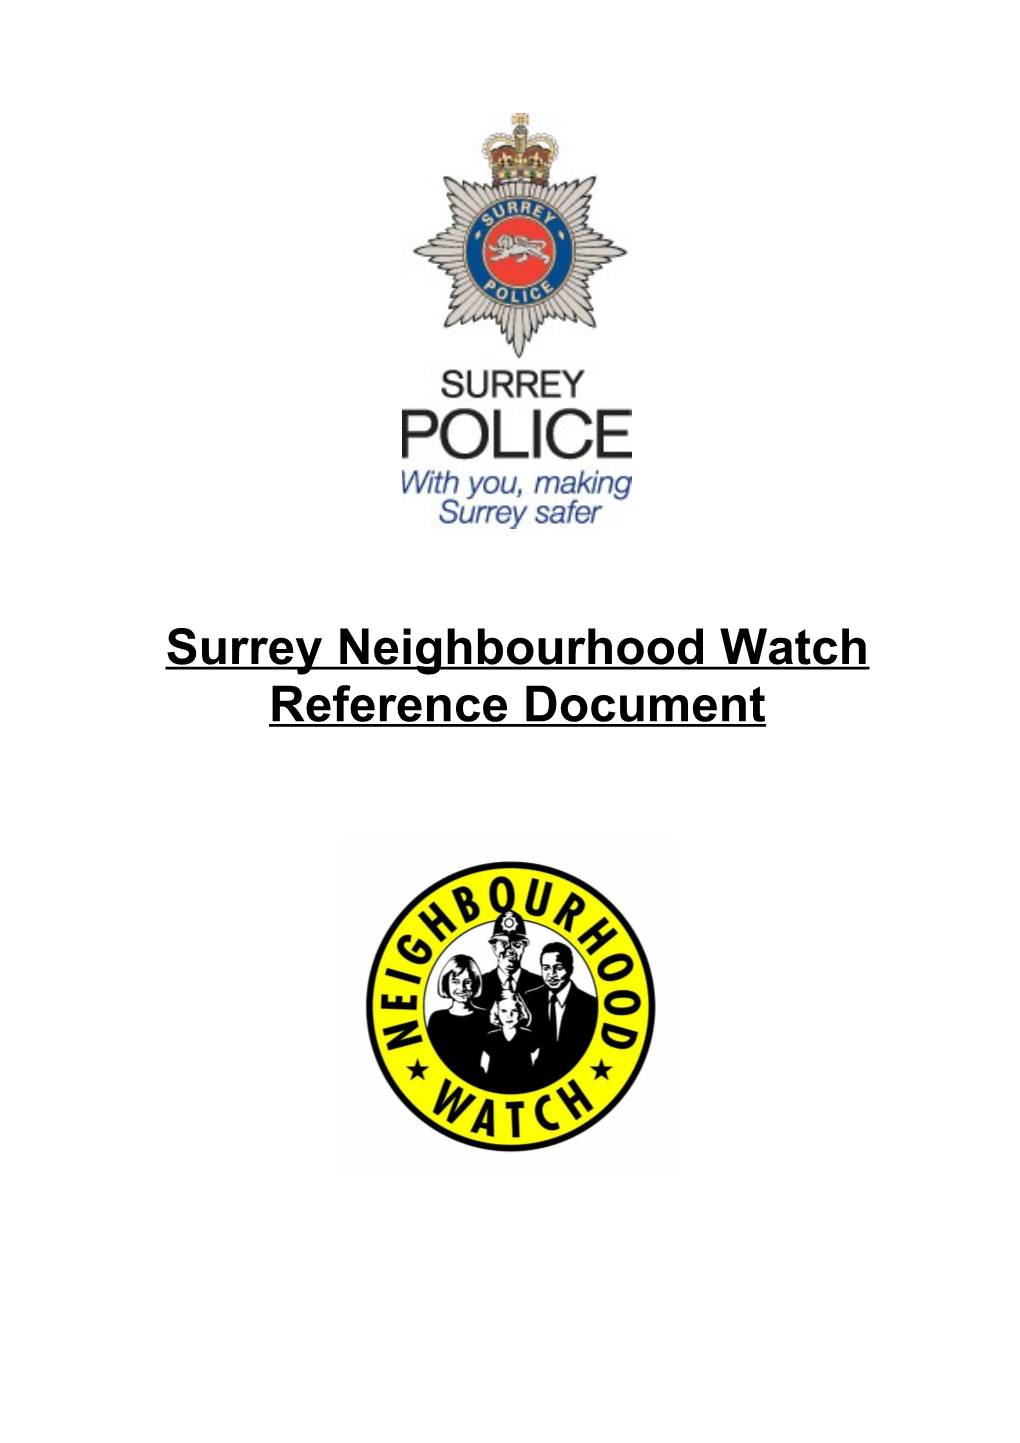 This Guide Is Designed As a Step-By-Step Aid to Assisting with Starting Neighbourhood Watch